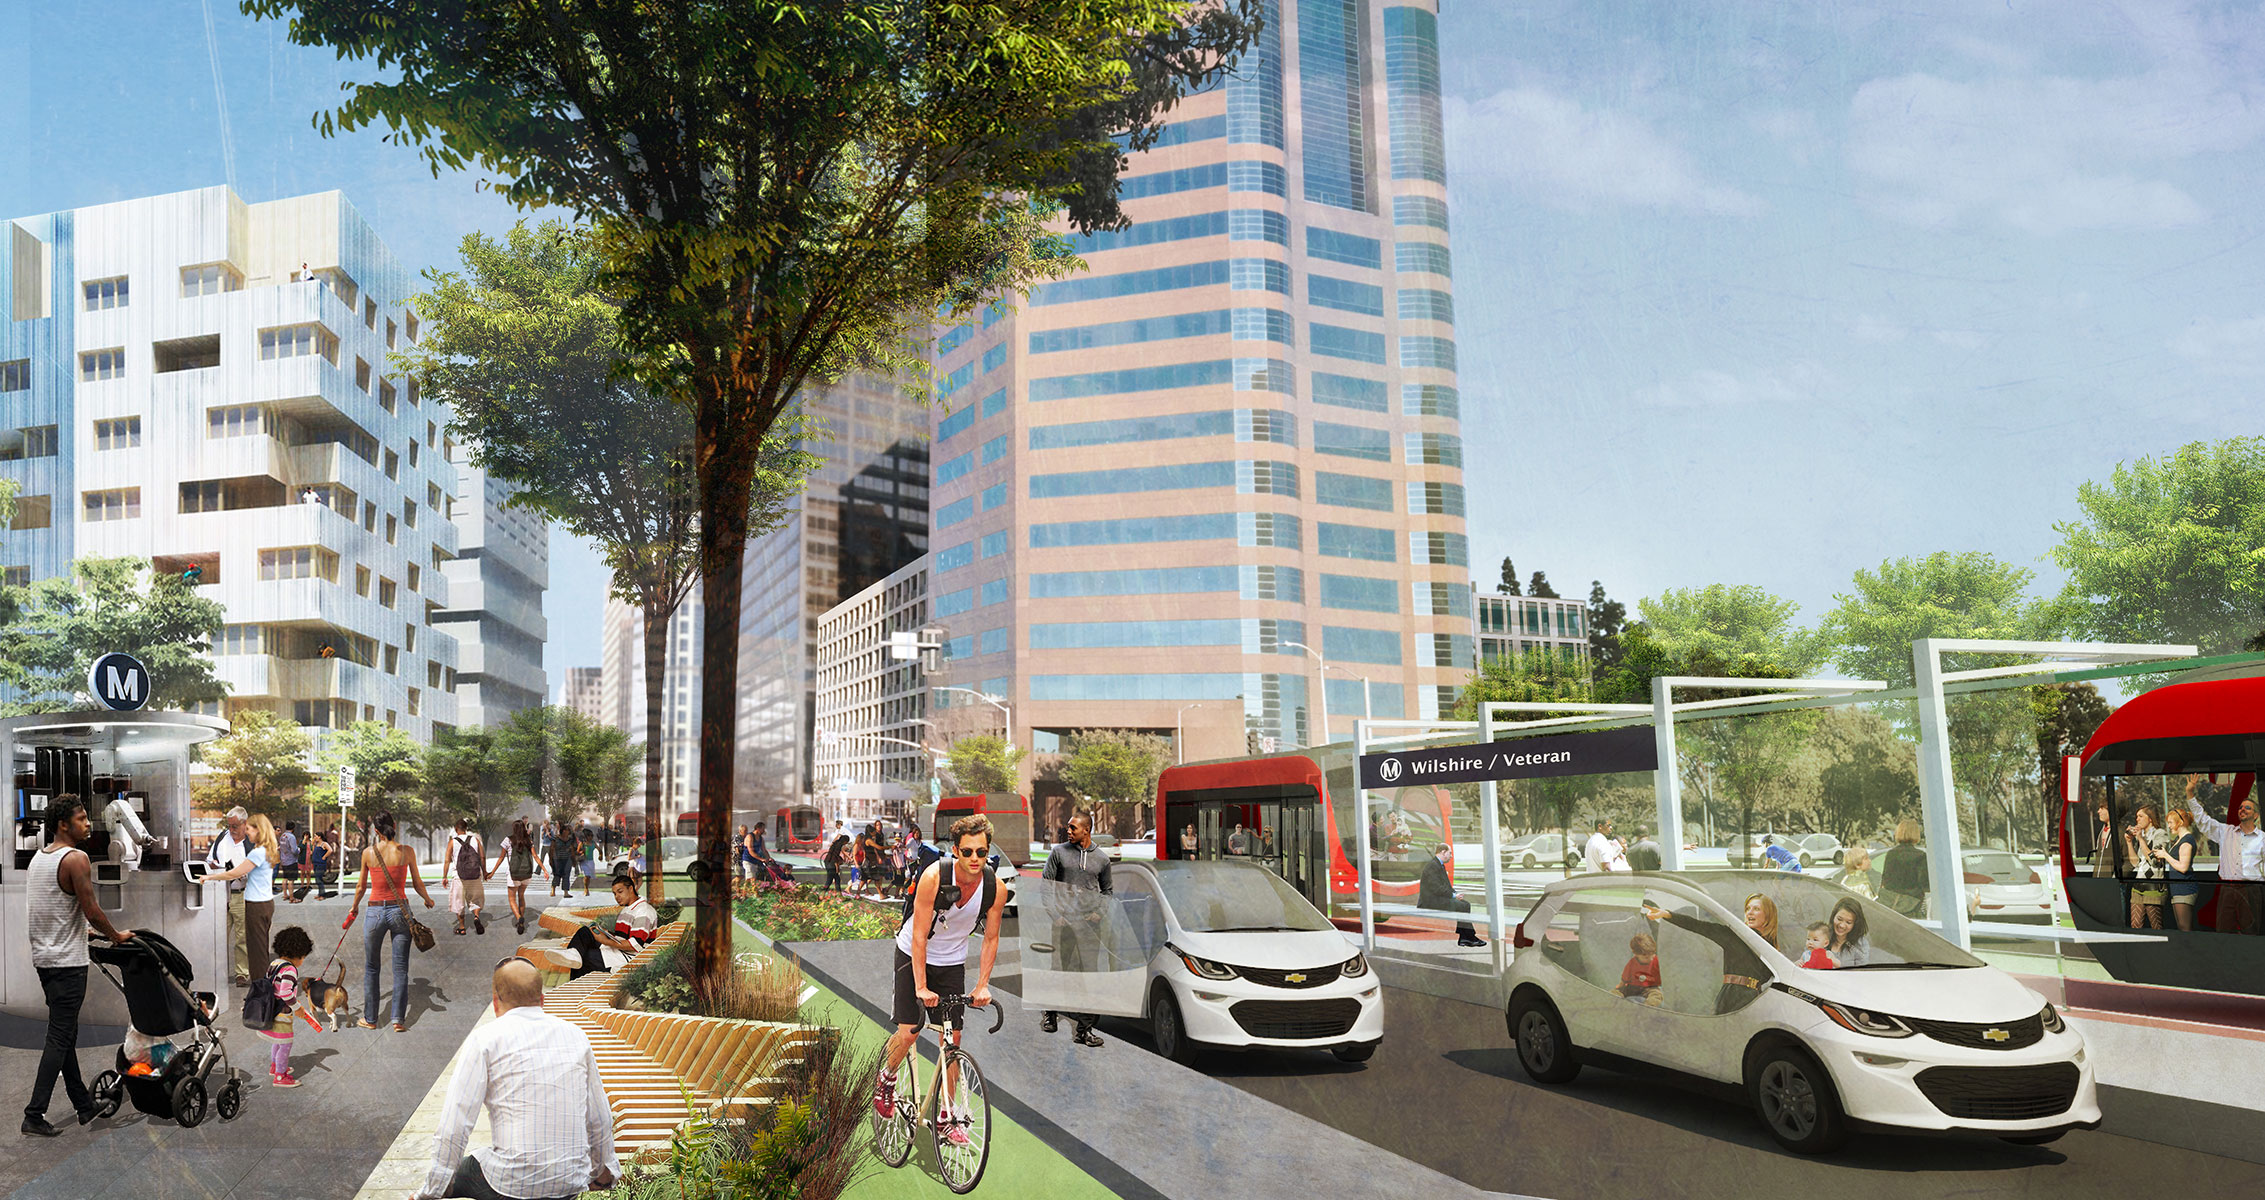 Rendering of Wilshire Boulevard in Los Angeles showing a vibrant, multi-modal future.